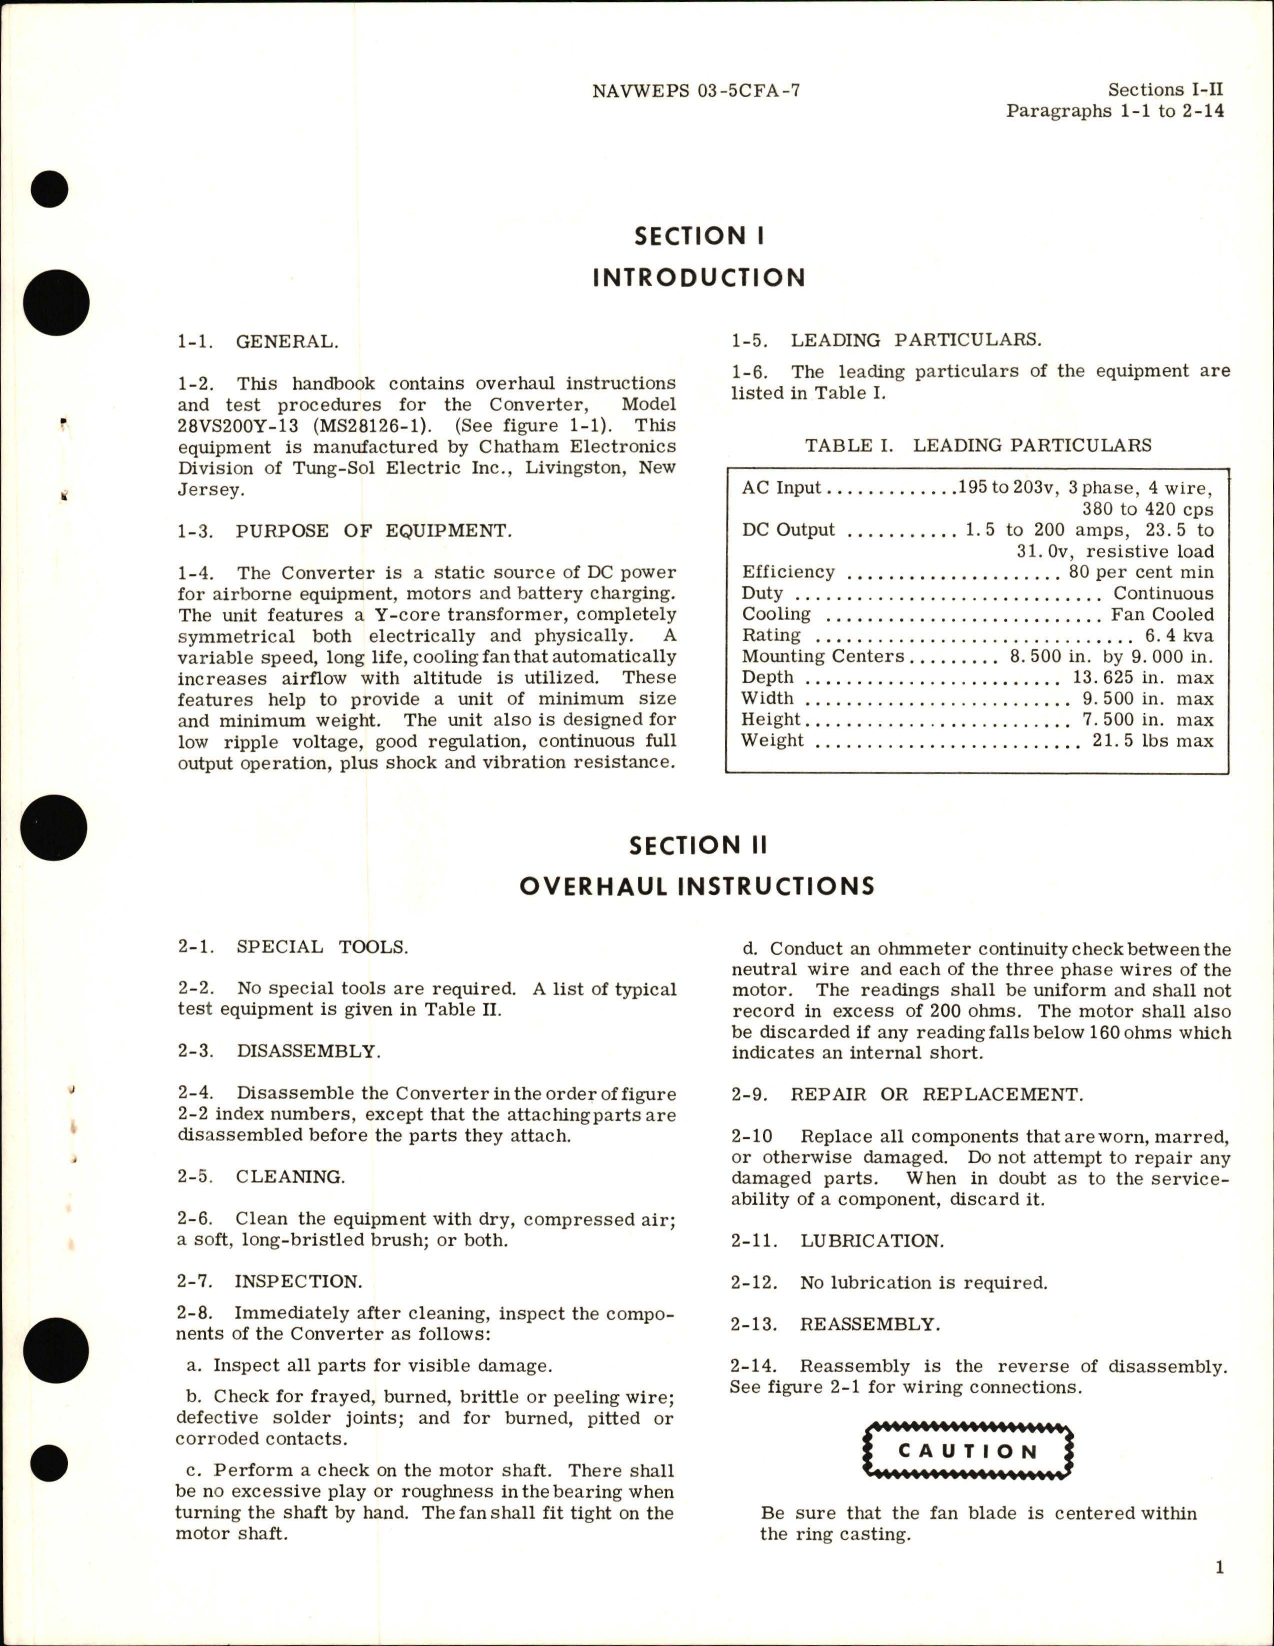 Sample page 5 from AirCorps Library document: Overhaul Instructions for Class A Converter, 200 Ampere - Part 28VS200Y-13 - Type MS28126-1